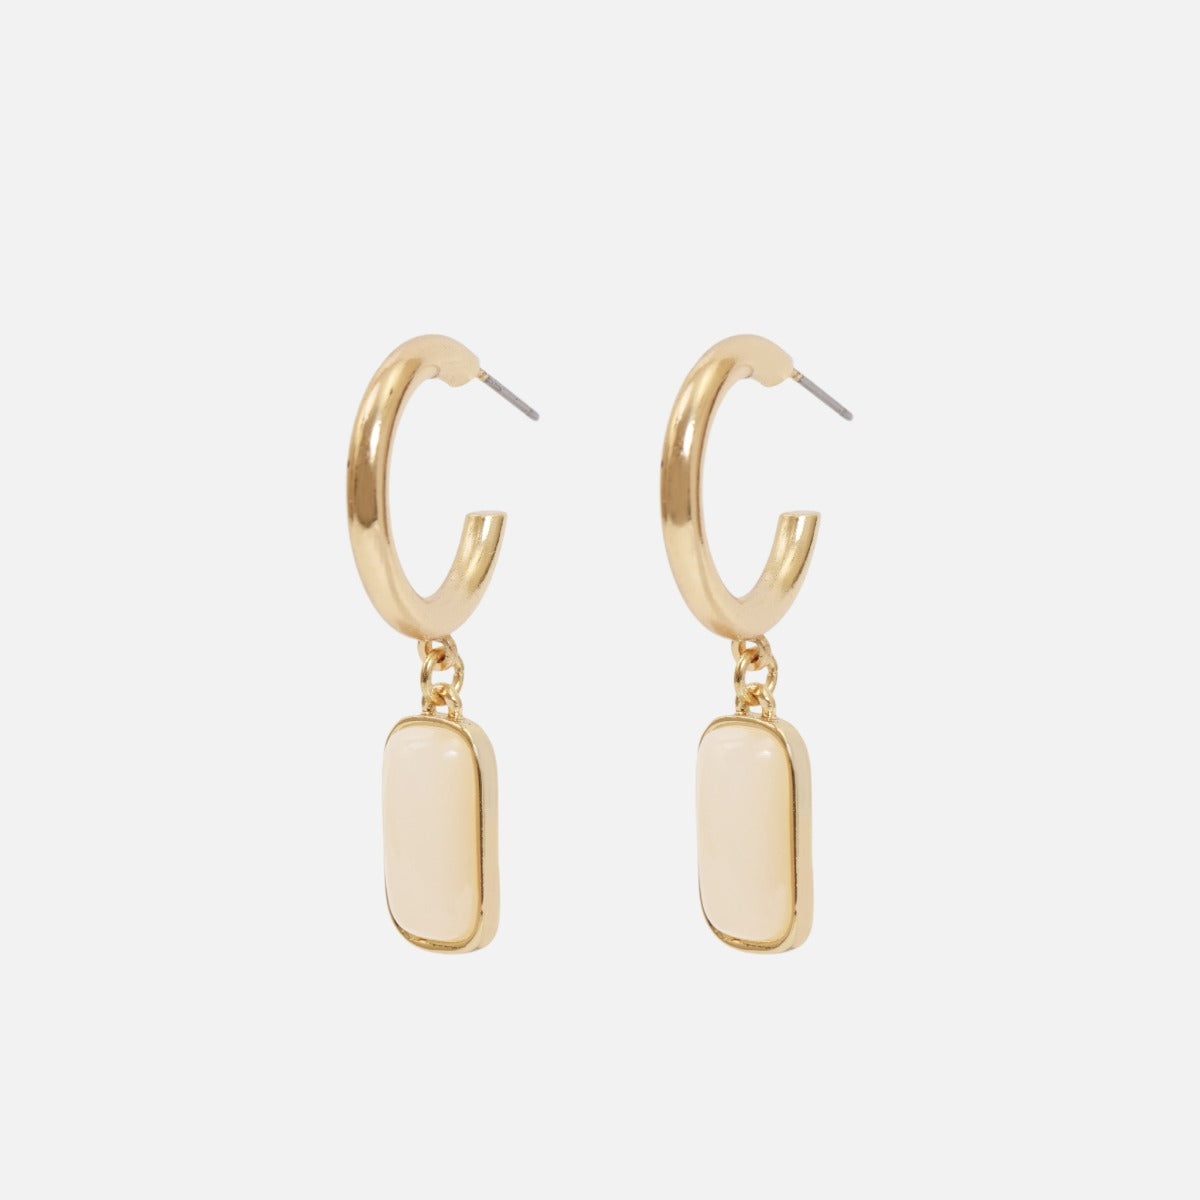 Set of two golden earrings with different pendants